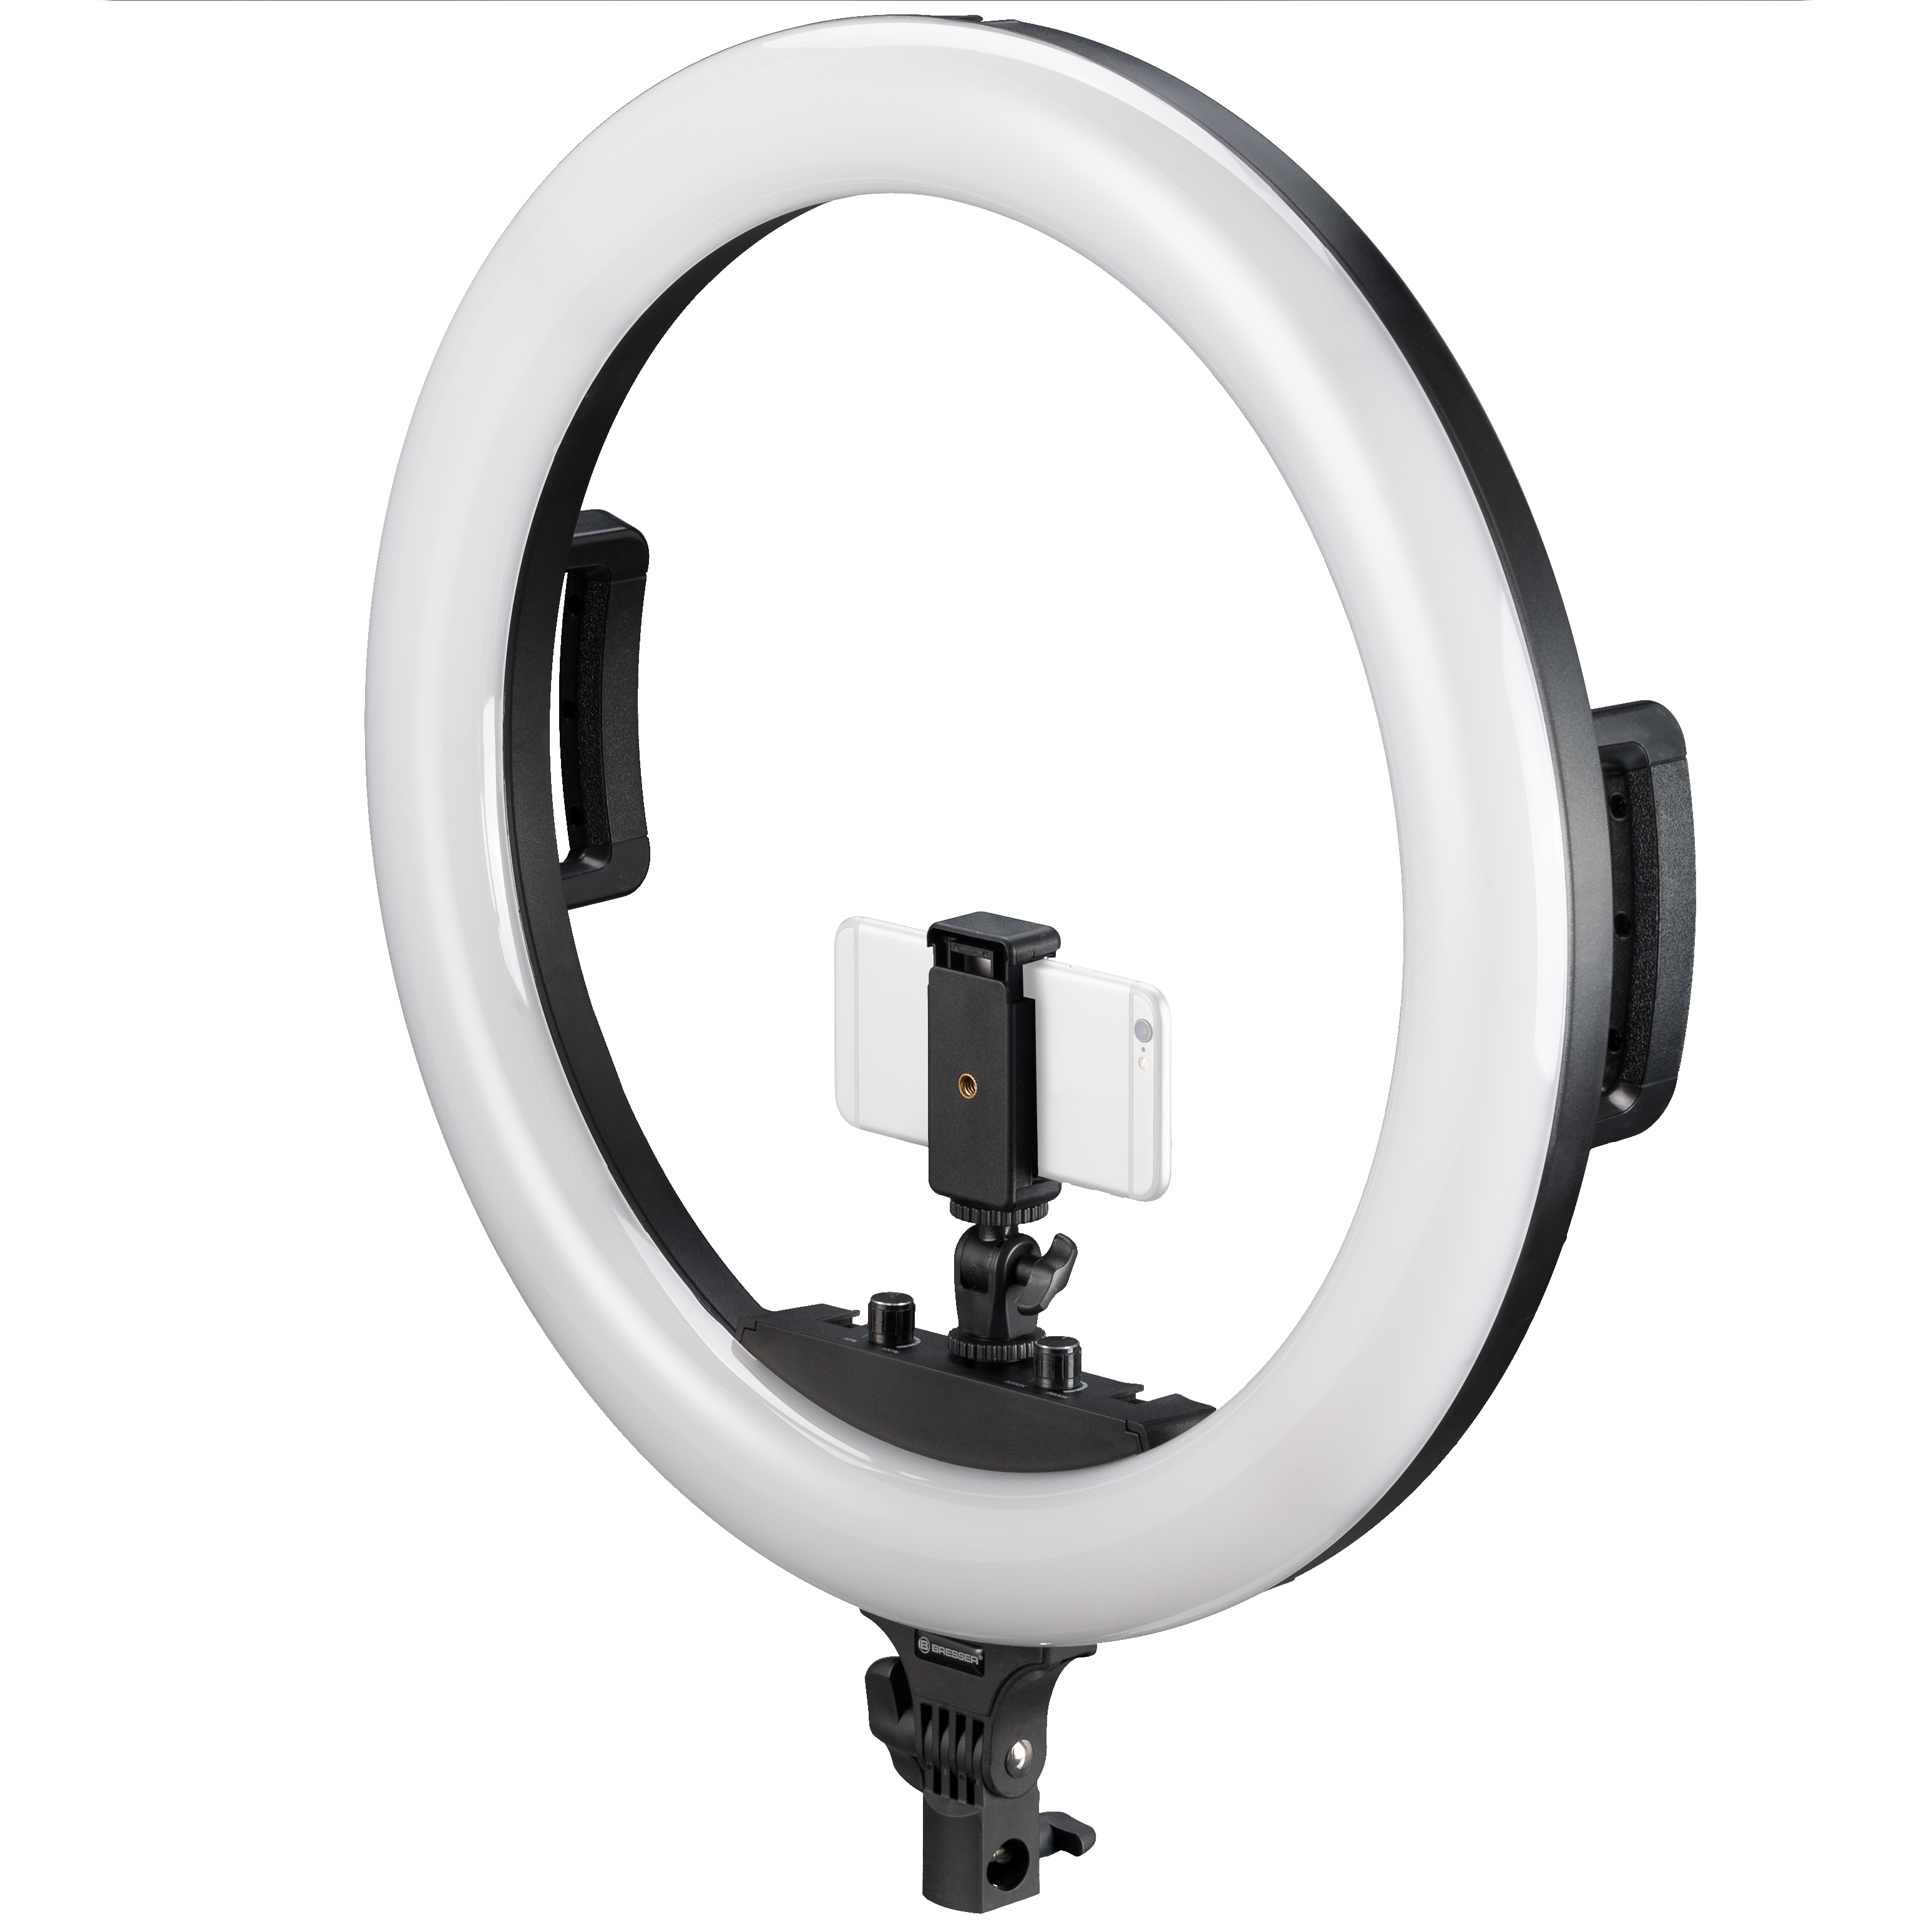 BRESSER STR-48B Bi-Color LED Ring Lamp 48W with Dimmer and Support for Camera and Smartphone